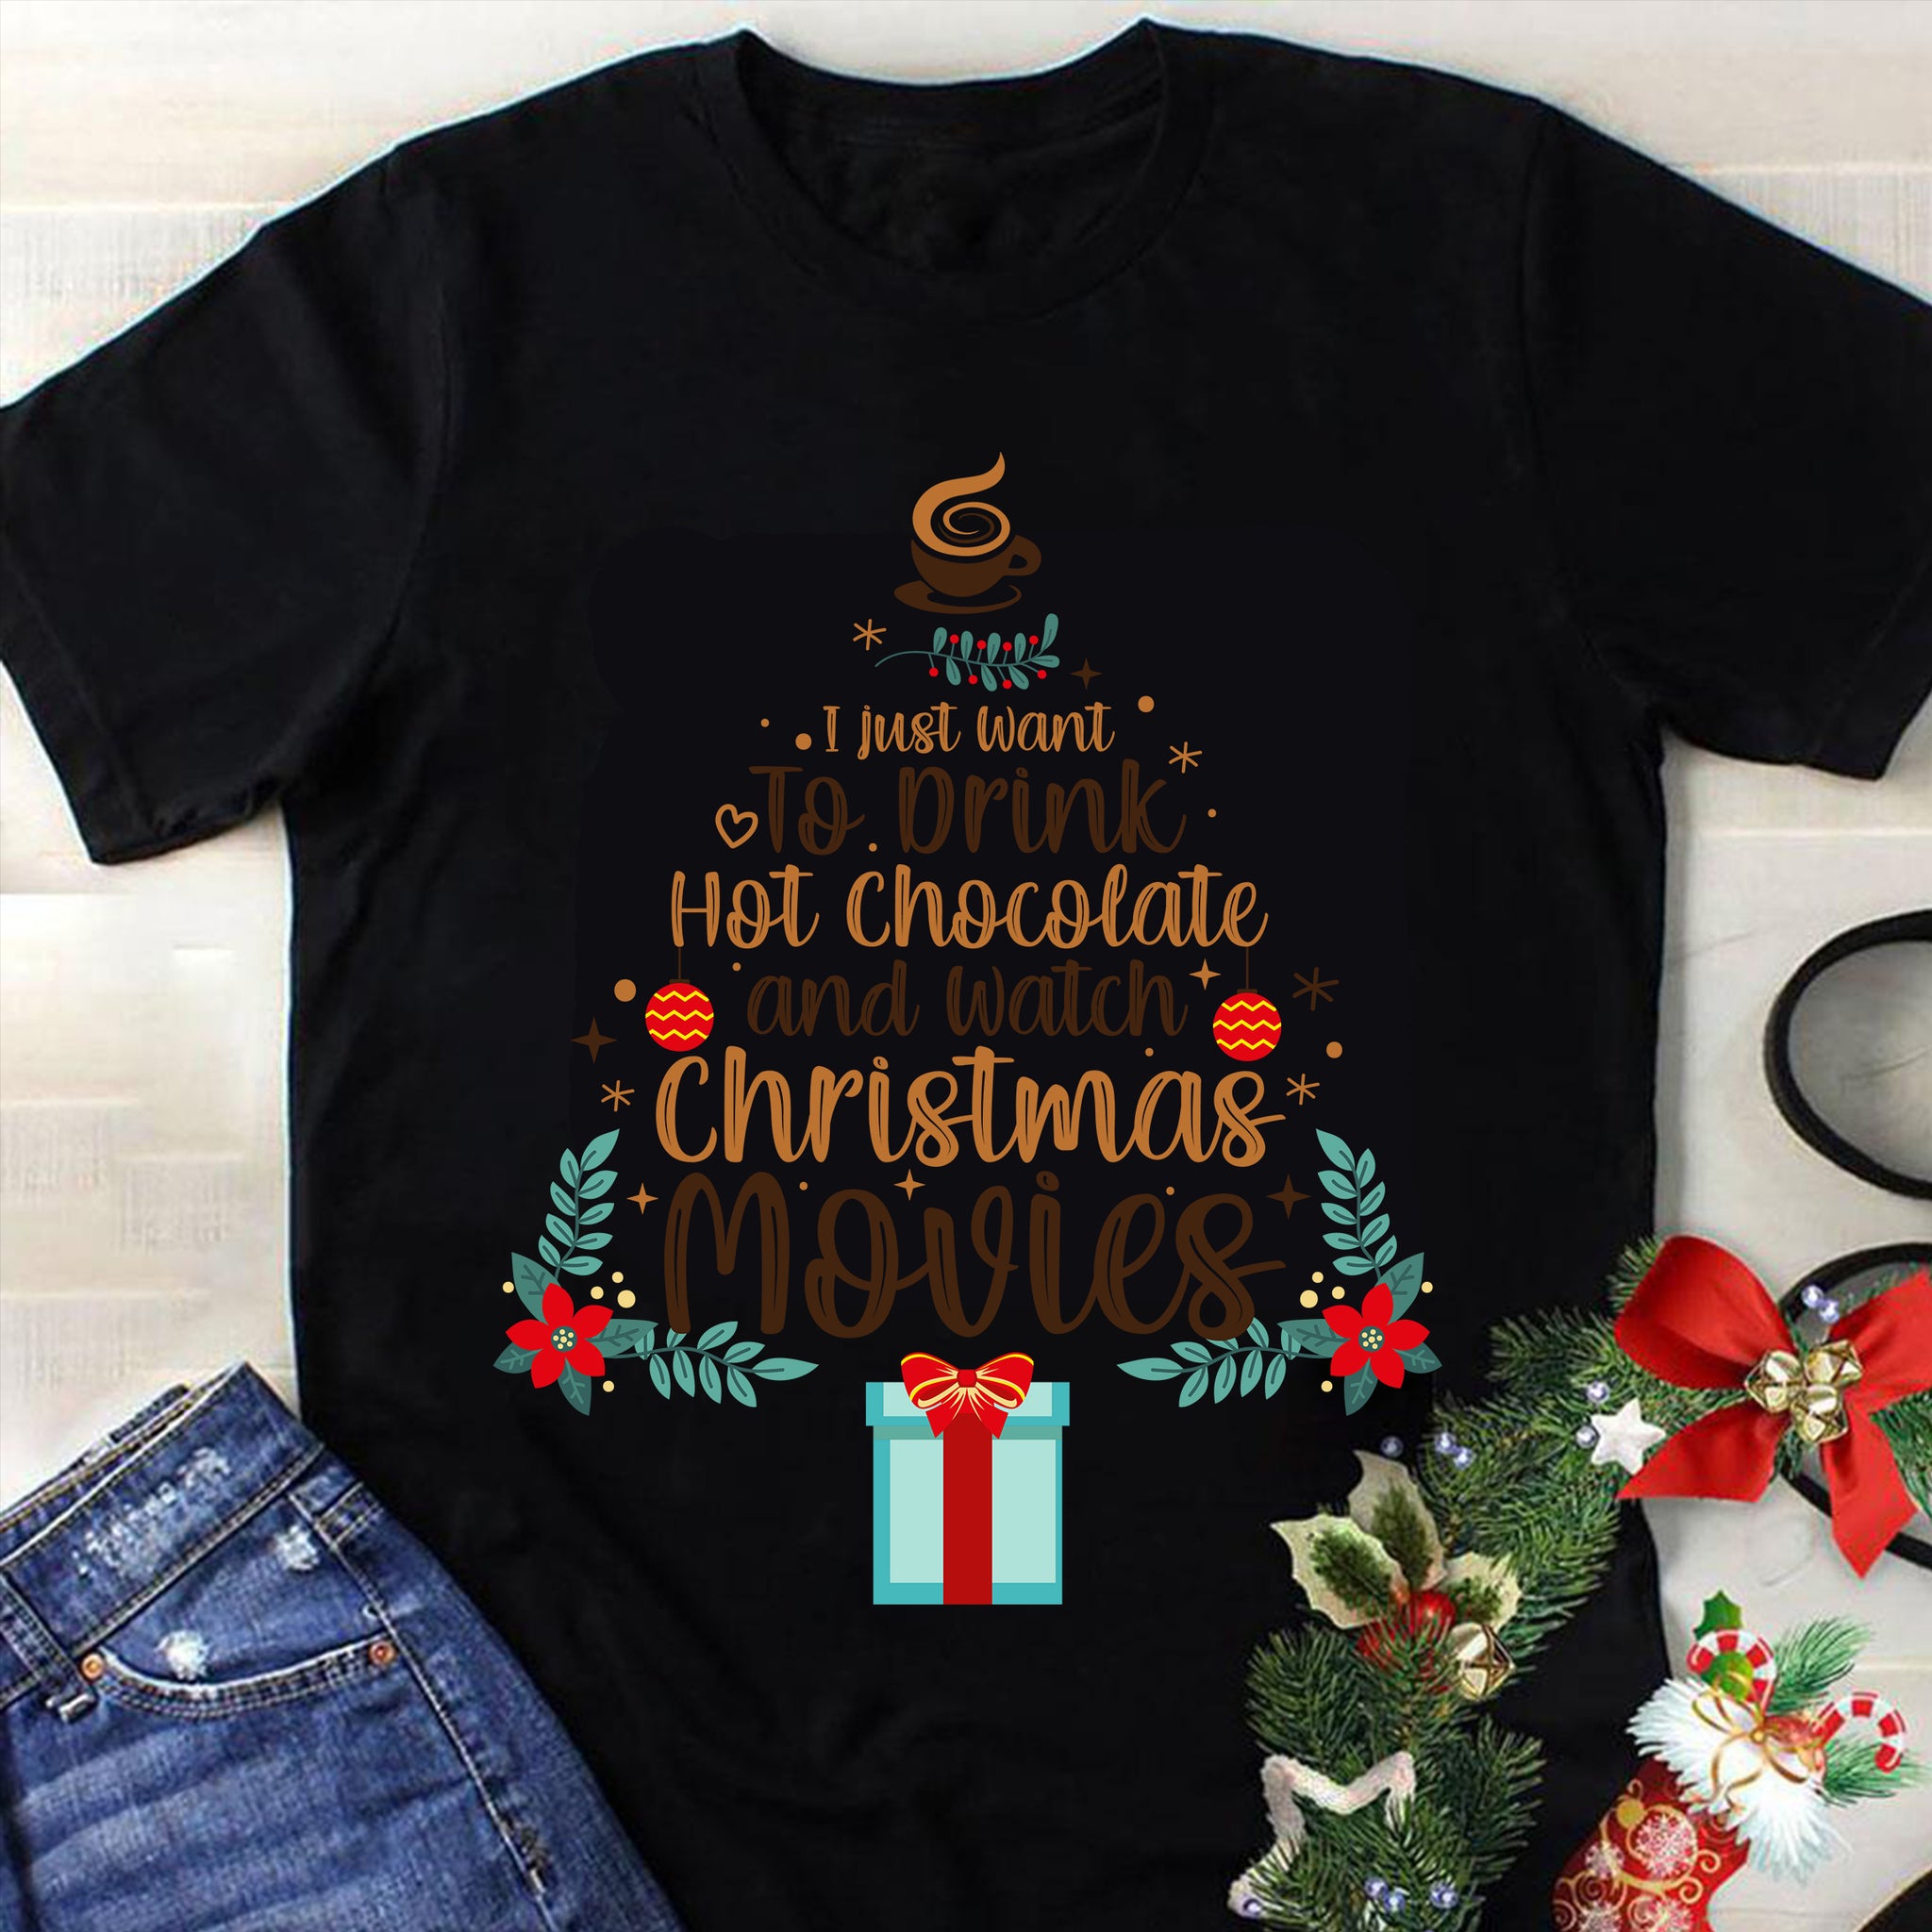 I Just Want to Drink Christmas Svg, Christmas Svg, Tree Christmas Svg, Tree Svg, Santa Svg, Merry Christmas Svg